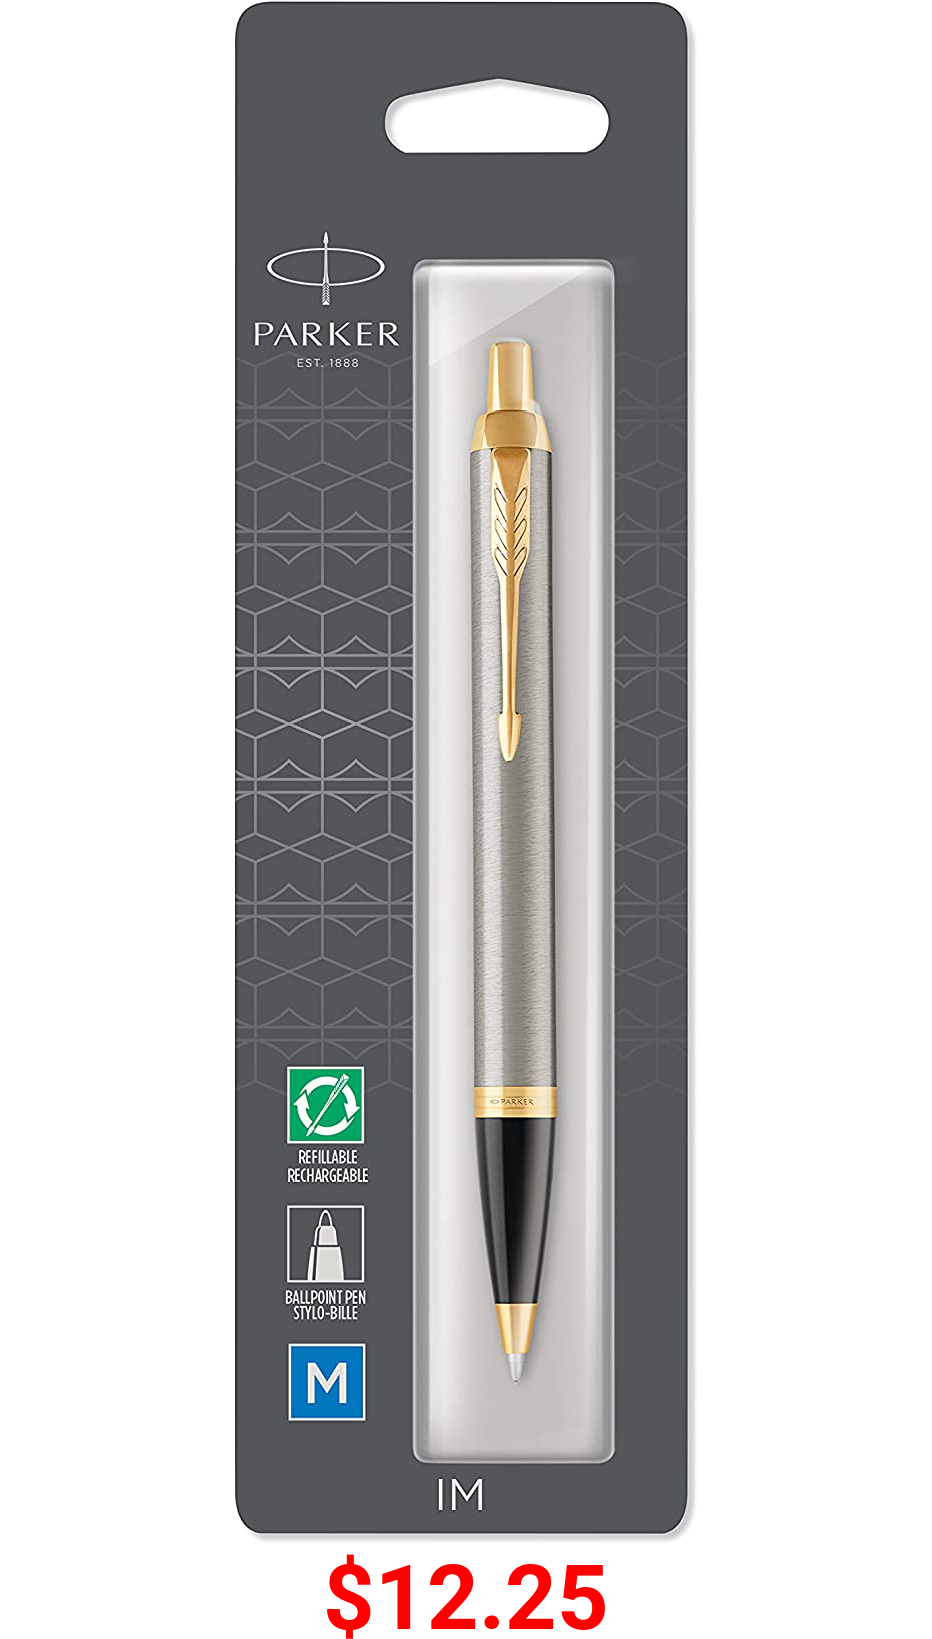 Parker IM Ballpoint Pen, Brushed Metal with Medium Point Black Ink Refill (1975559)